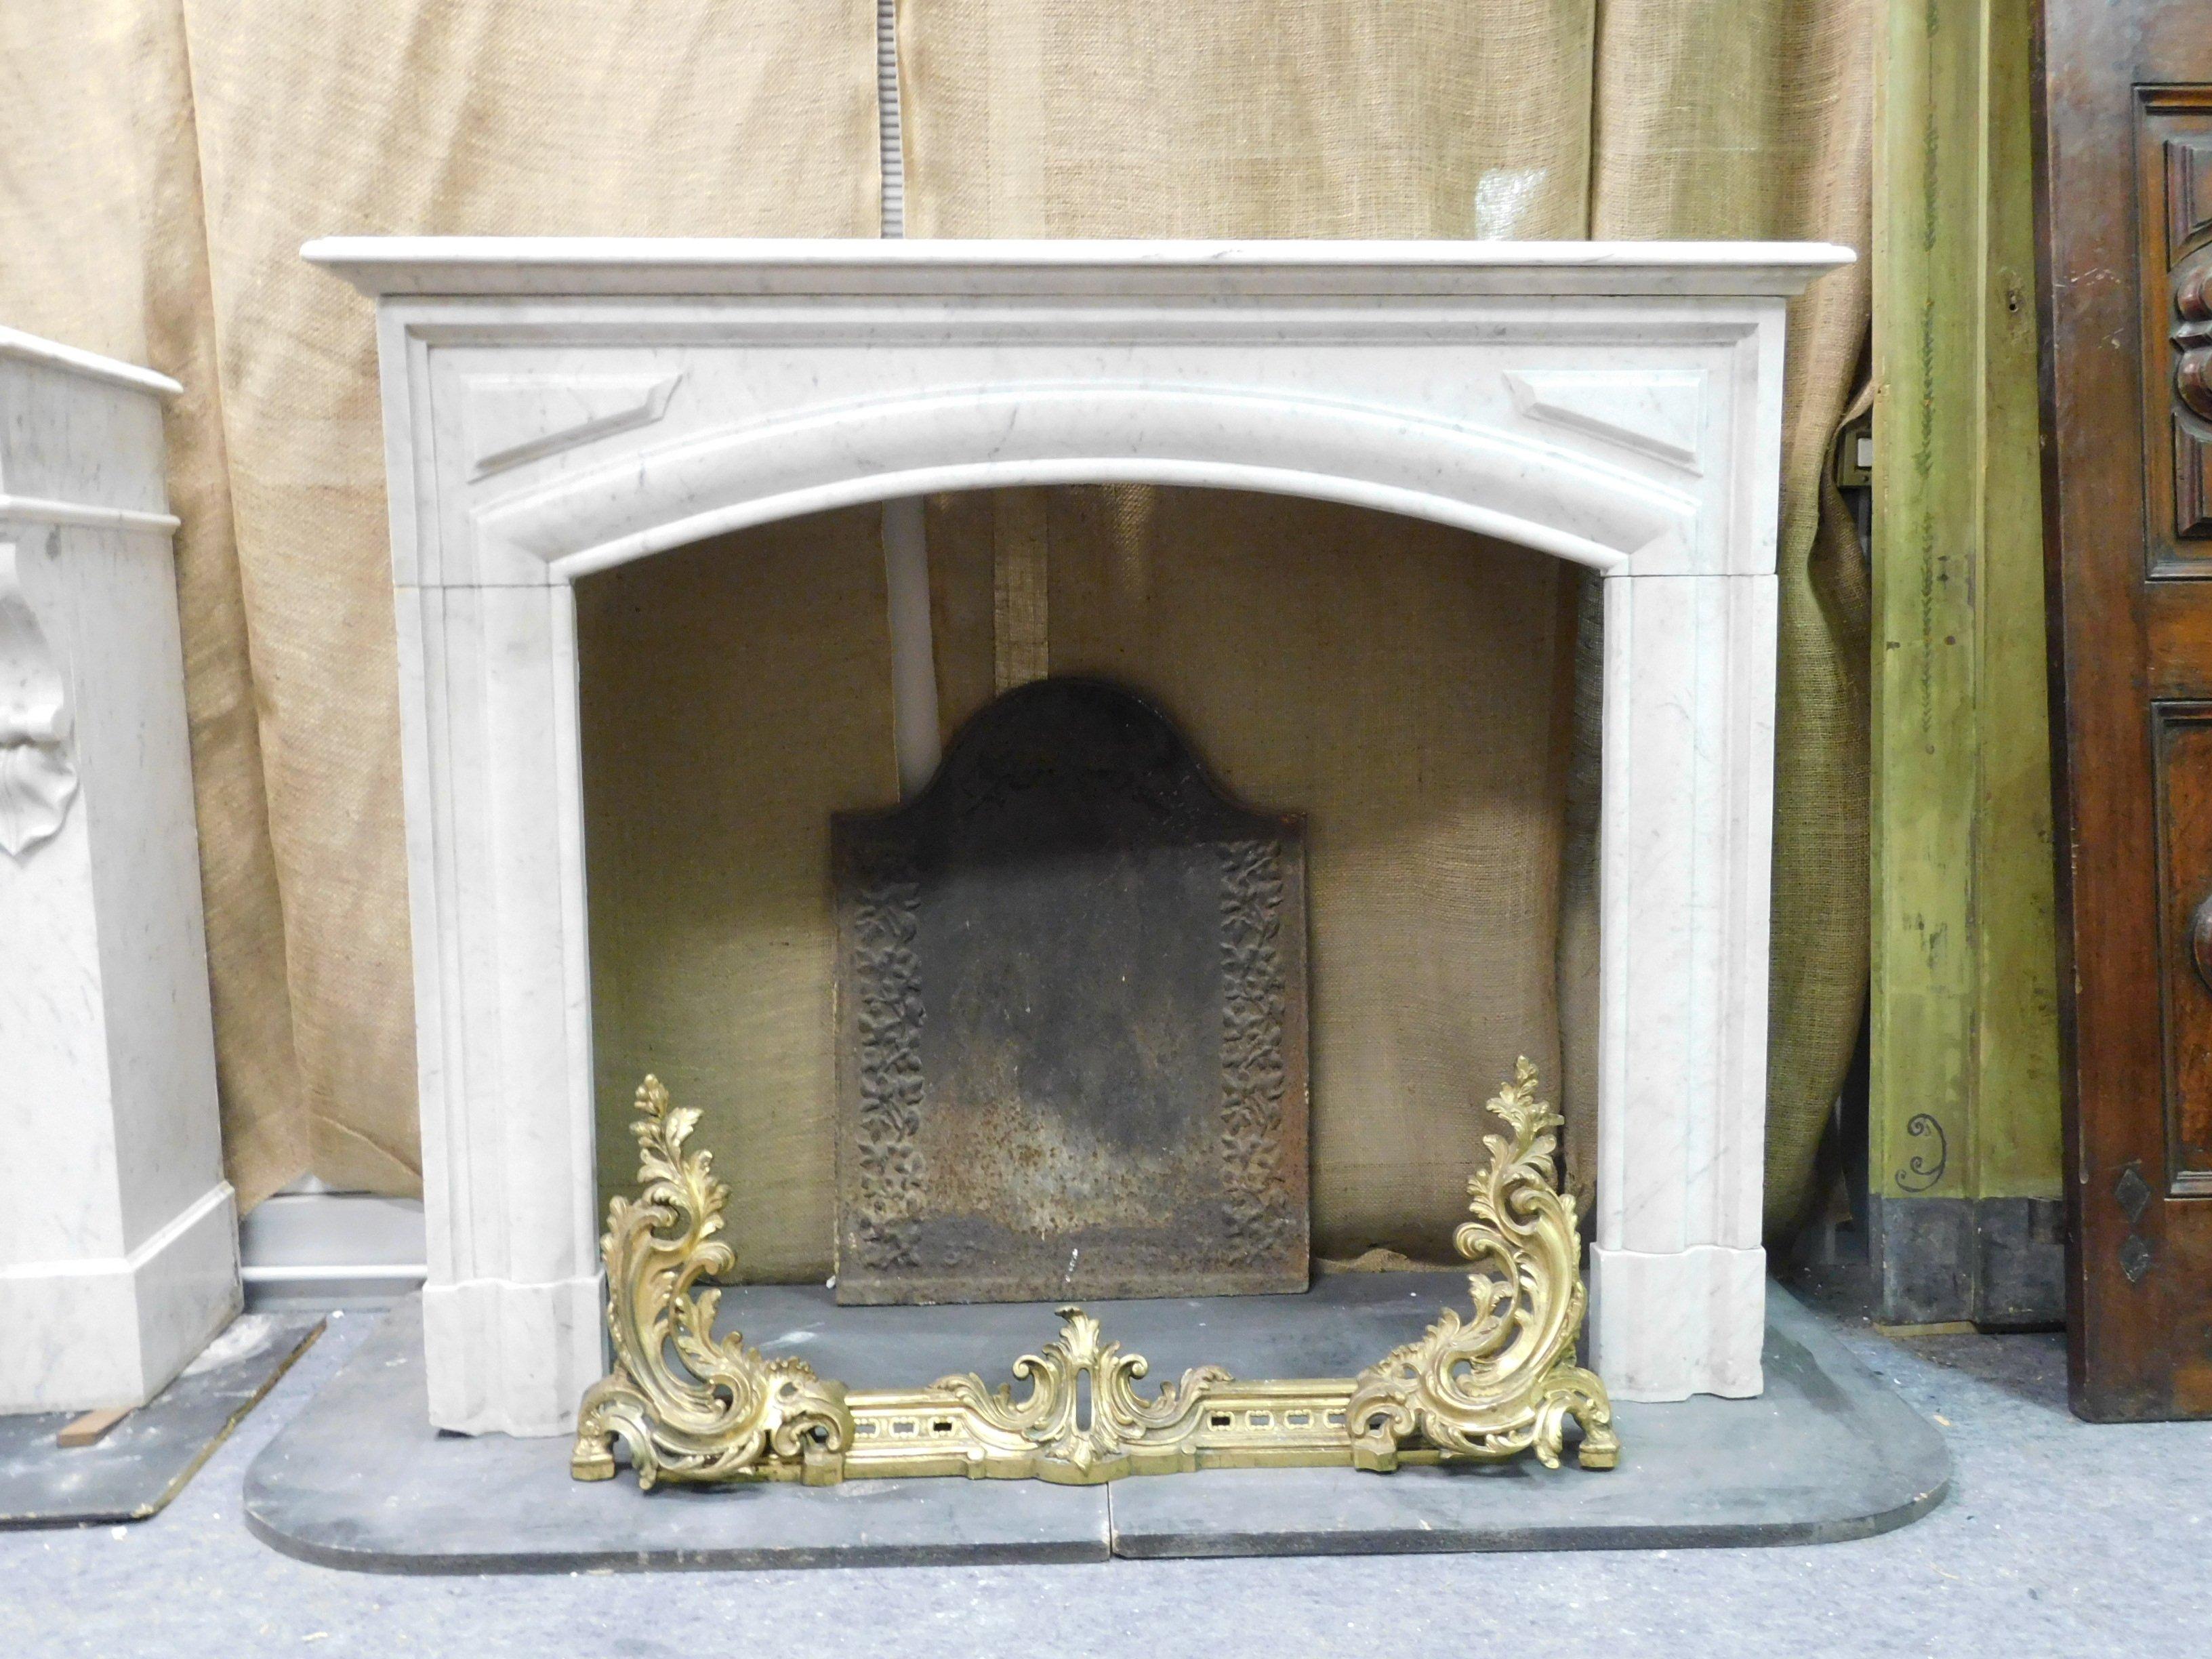 Antique white marble fireplace, 19th century, Italya antique fireplace in white marble, simple and minimal in shape, rounded mouth, 19th century, Italy.
Thanks to its soft but very simple lines, it fits well even in modern interiors, made with